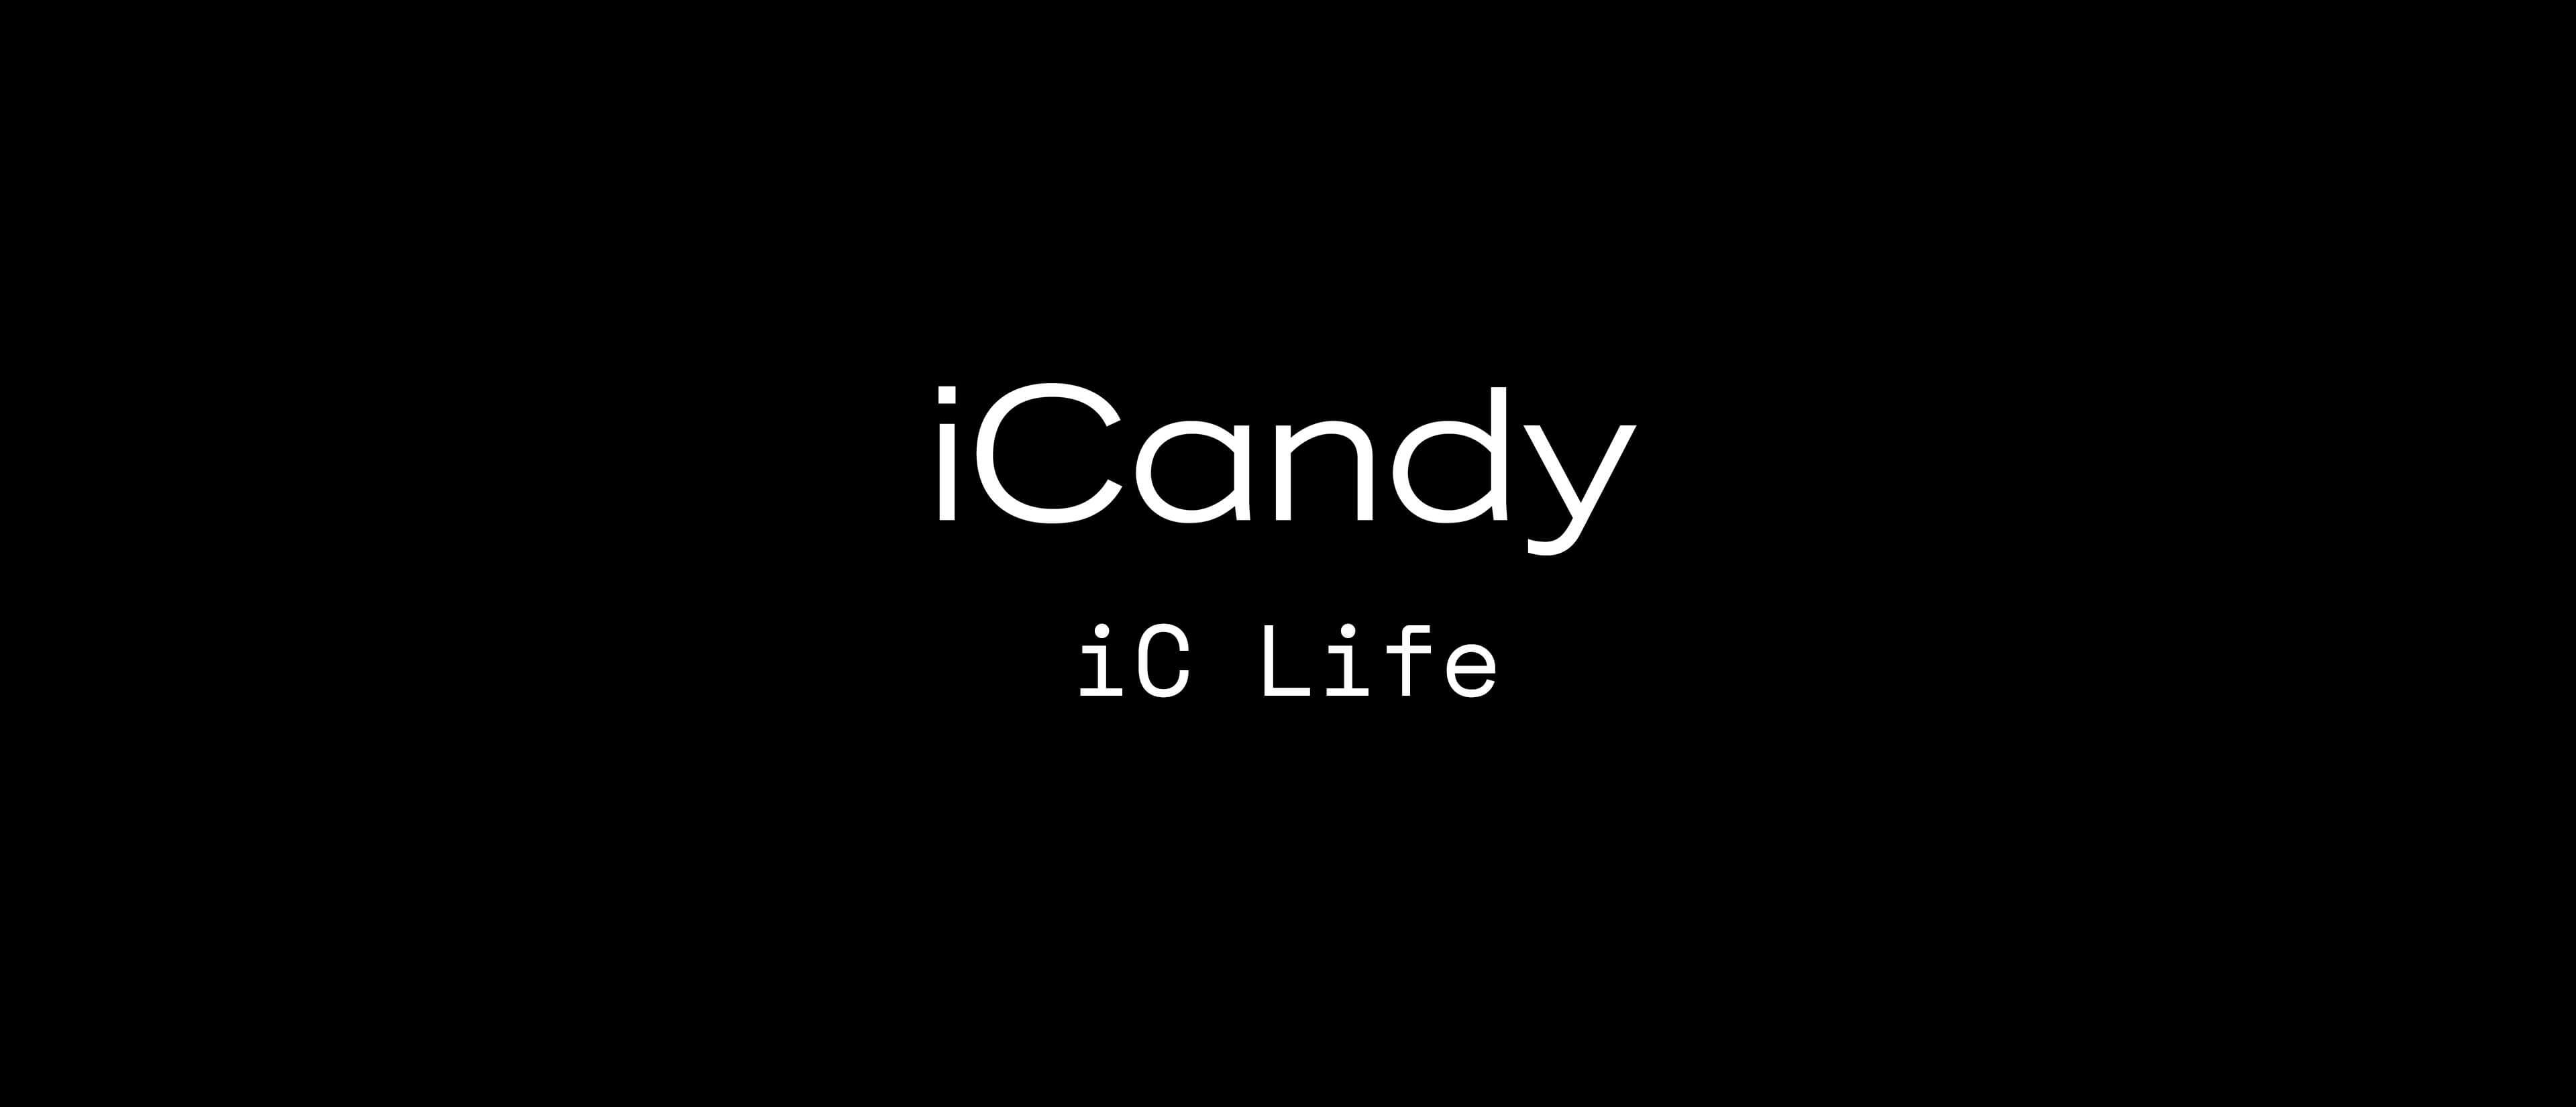 An Update to iCandy Customers